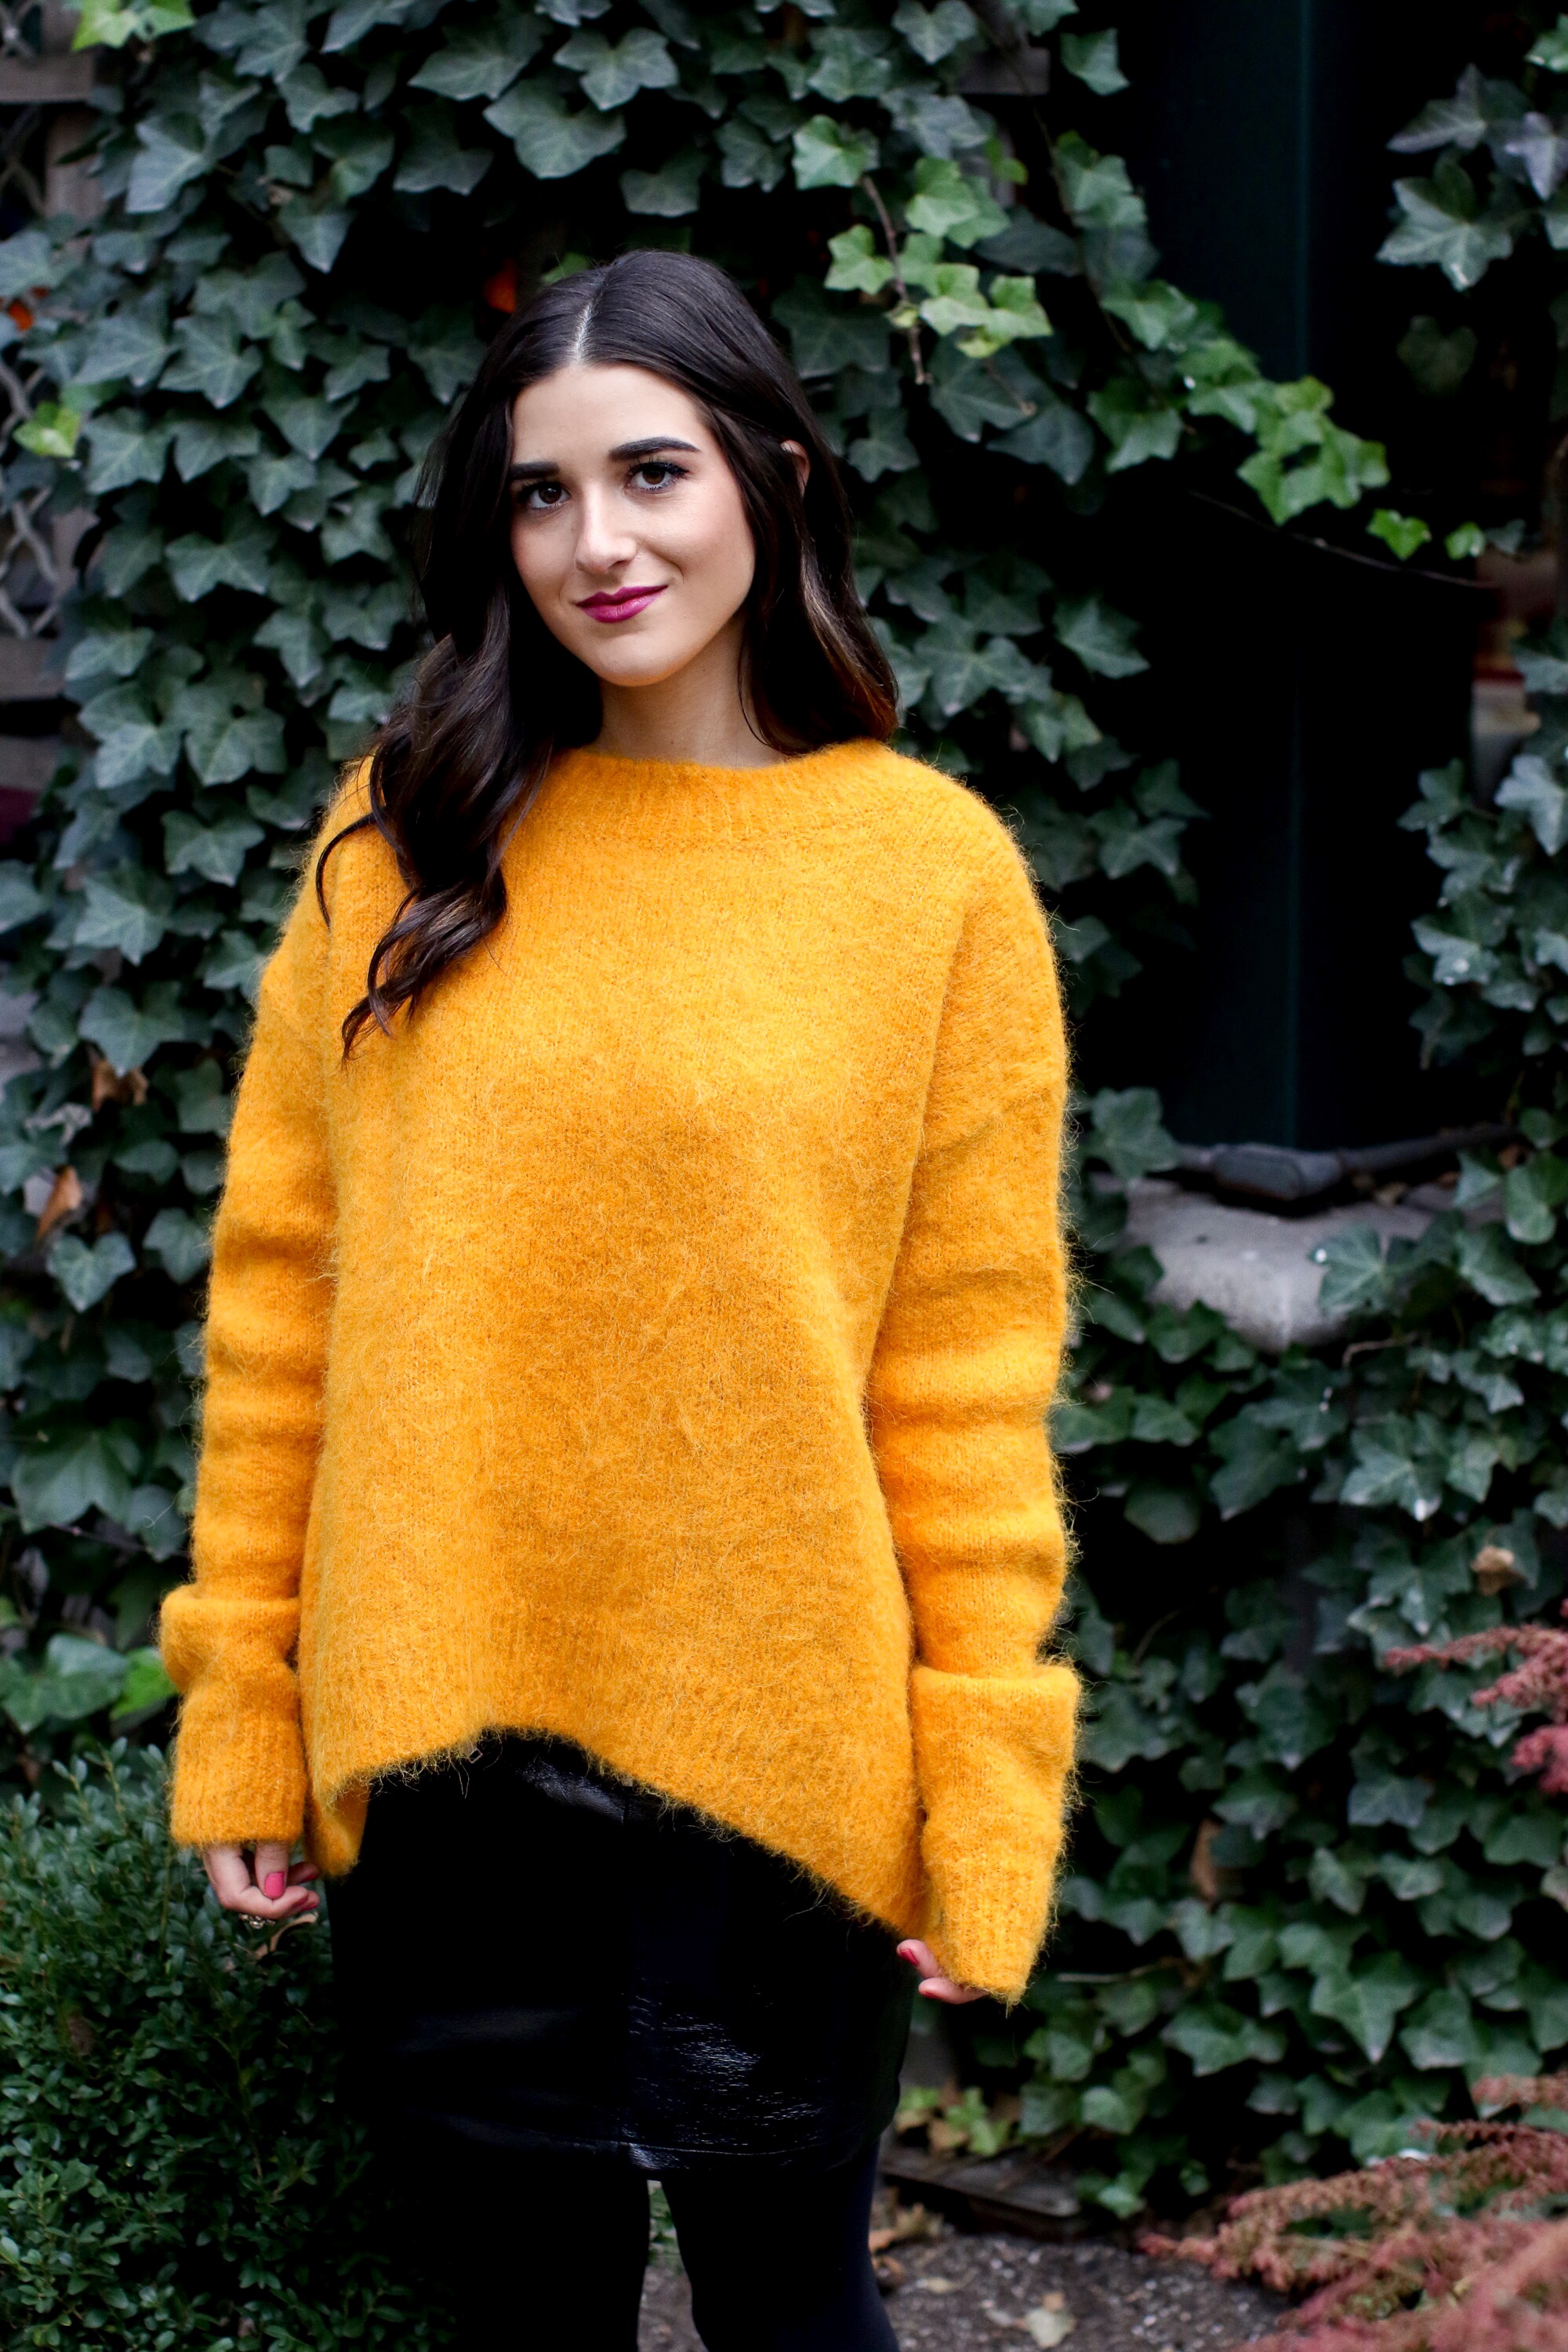 Yellow Sweater Pleather Skirt Why You Should Think Before You Unfollow Esther Santer Fashion Blog  NYC Street Style Blogger Outfit OOTD Trendy Cozy Winter Look Girl Women Oversized Top New York City Instagram Tips DSW Studded Boots H&M Topshop Details.jpg